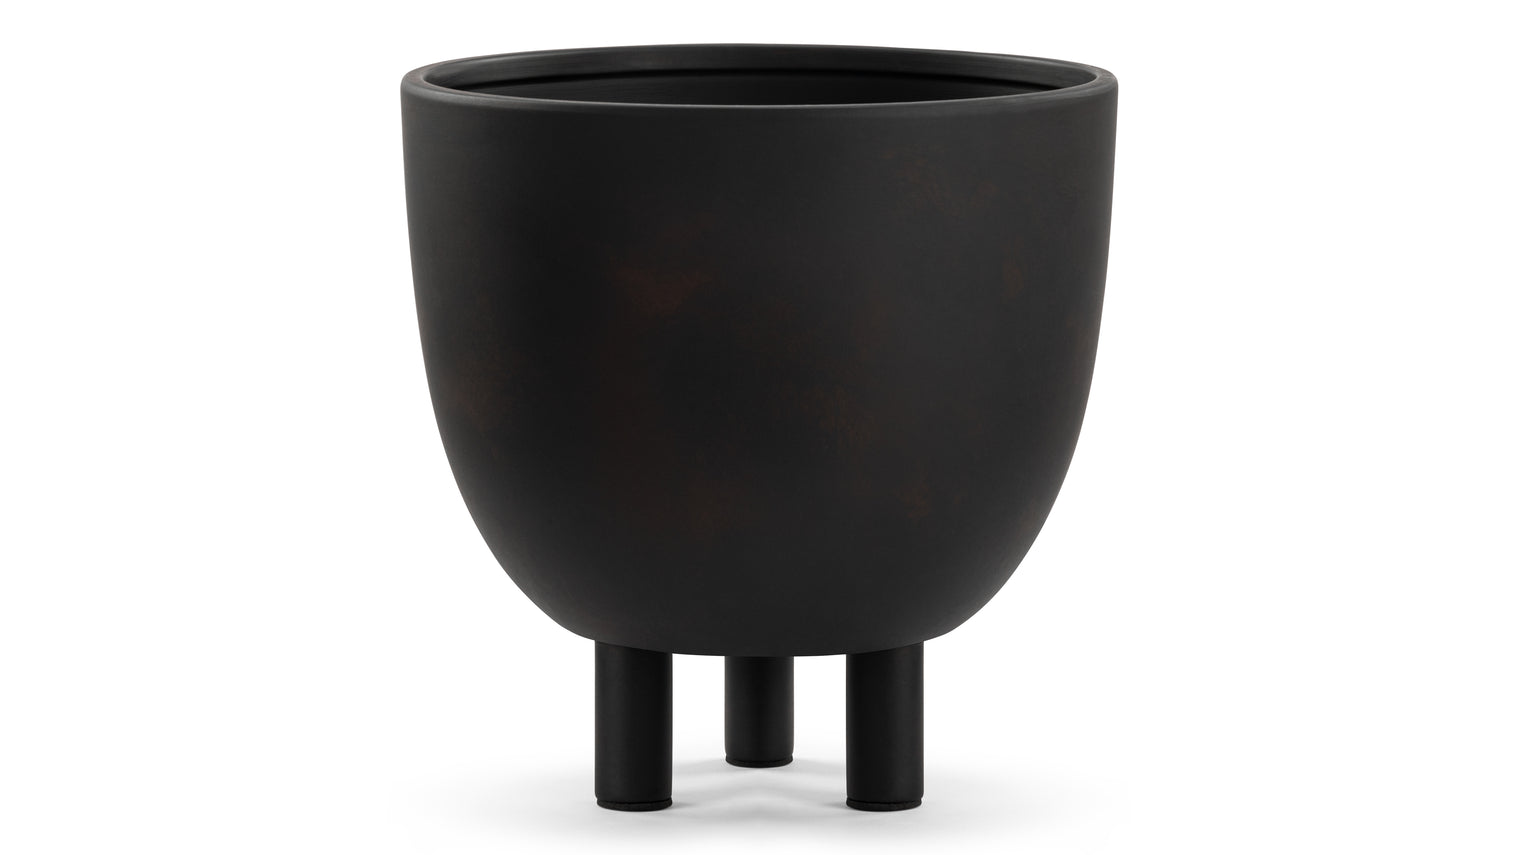 Scandinavian Statement | Utilizing the Scandinavian approach of natural materials and minimal color, combined with playful shapes, the Axl Pot brings a joyful yet soothing energy to any space.
